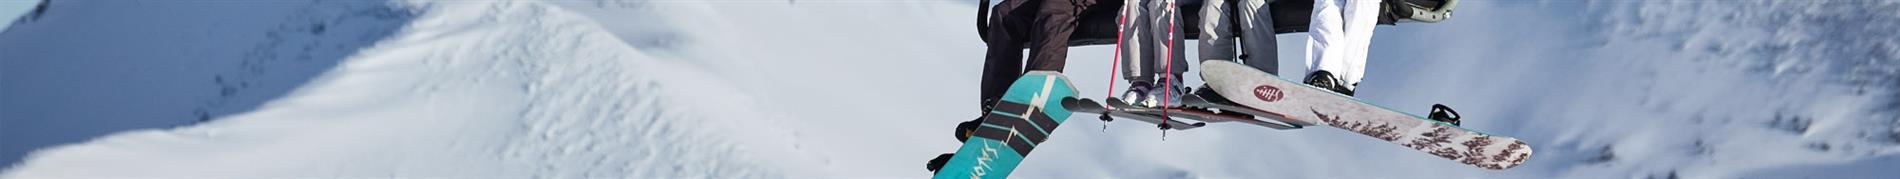 Blizzard Women's skis, snowboards, and accessories for everything snow. 